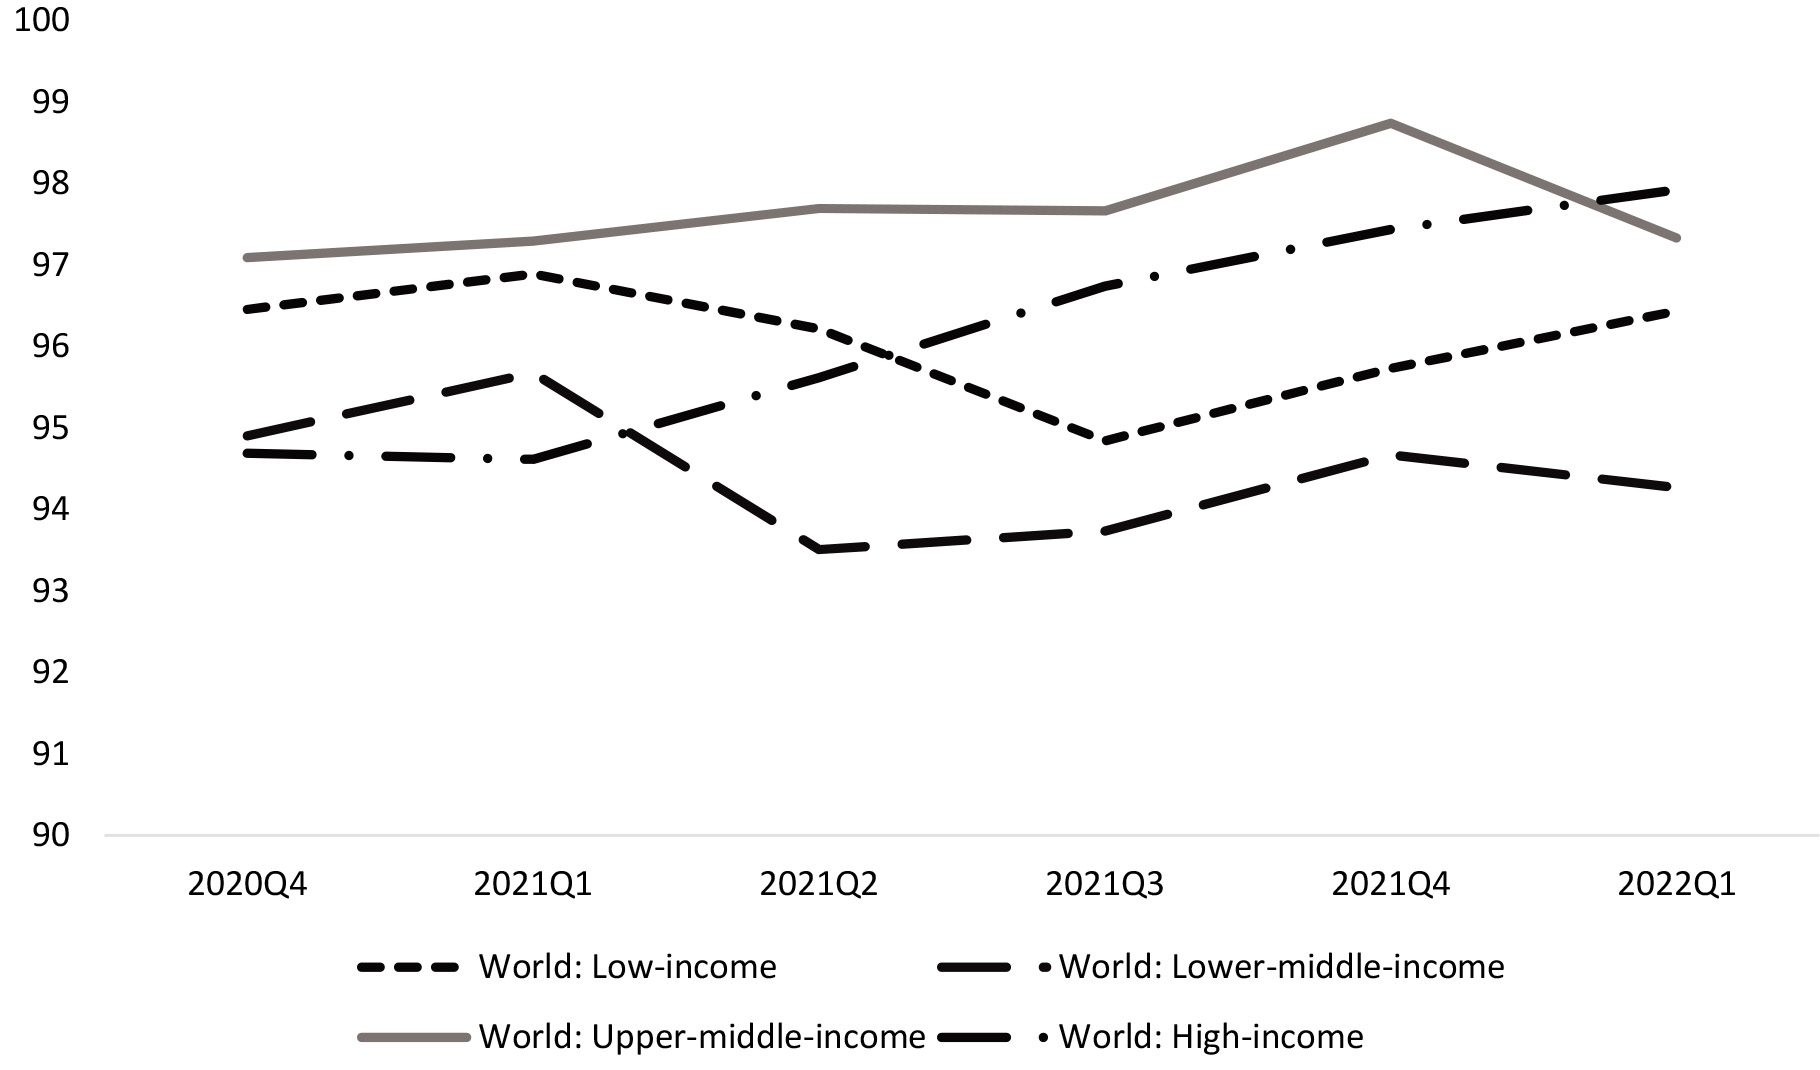 Estimates of weekly hours worked (divided by 15–64 population) by income level, indexed data (2019Q4 = 100). Results of ILO Nowcasting model for the period 2005-2022Q1 at the global level. The 2005–2019 period is only estimated at the annual level, whereas from 2020Q1 and onwards quarterly estimates are available.